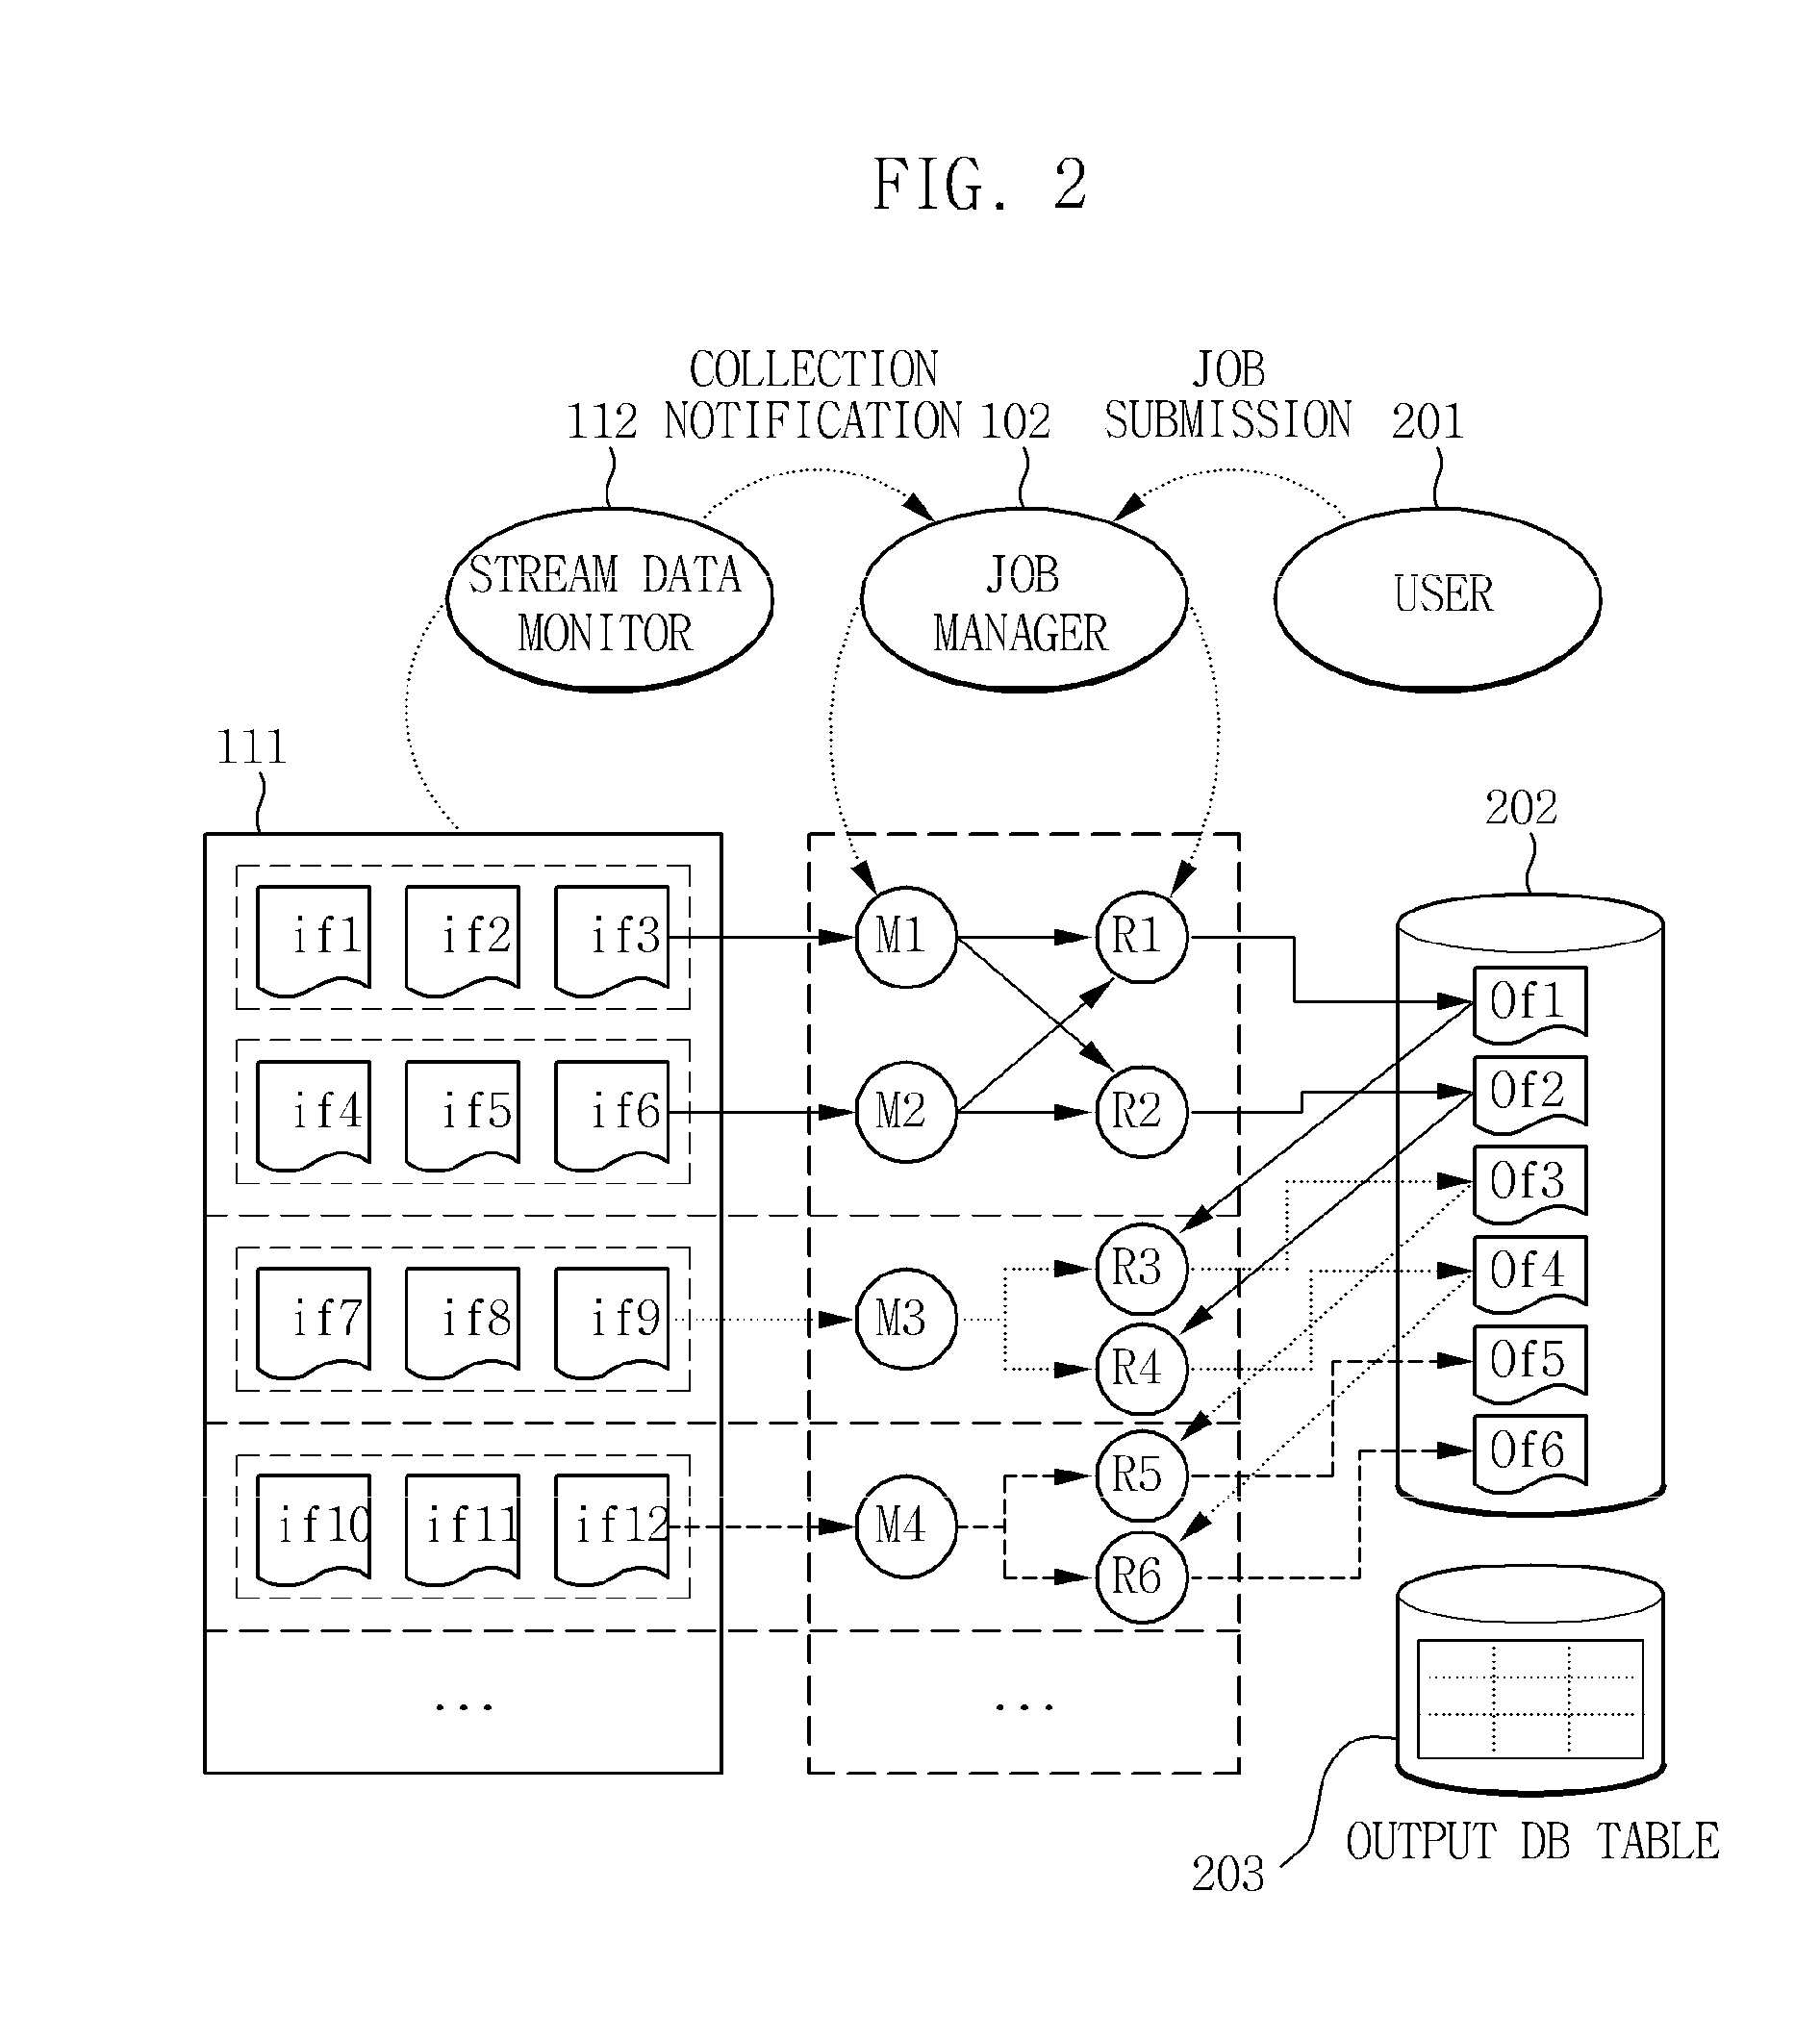 Incremental mapreduce-based distributed parallel processing system and method for processing stream data